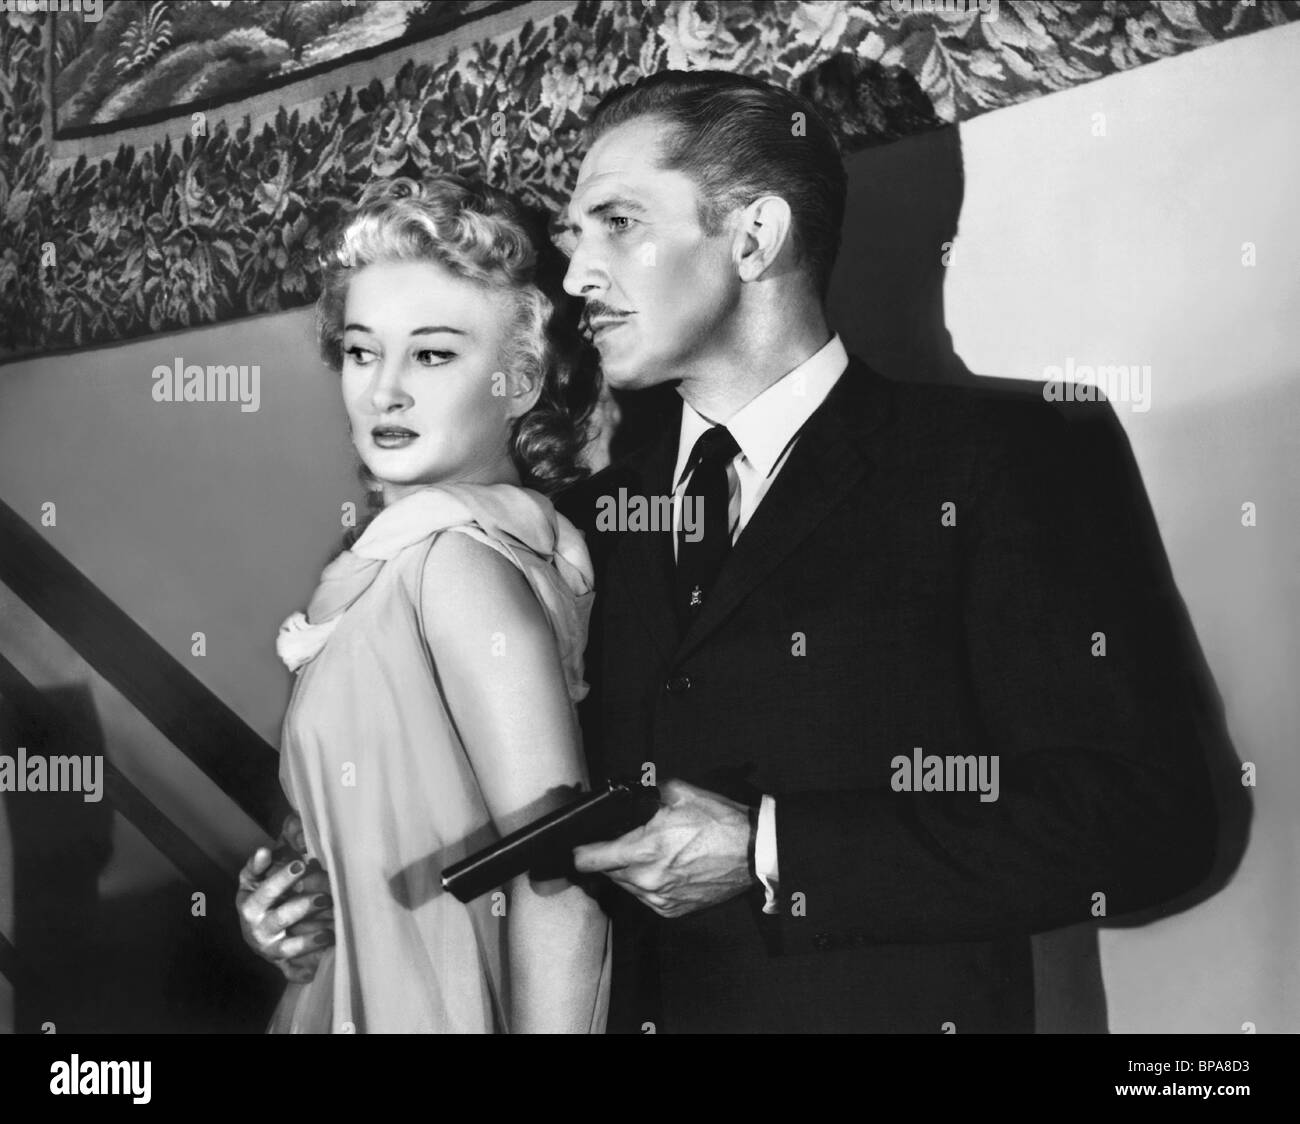 CAROL OHMART, VINCENT PRICE, HOUSE ON HAUNTED HILL, 1959 Stock Photo - Alamy